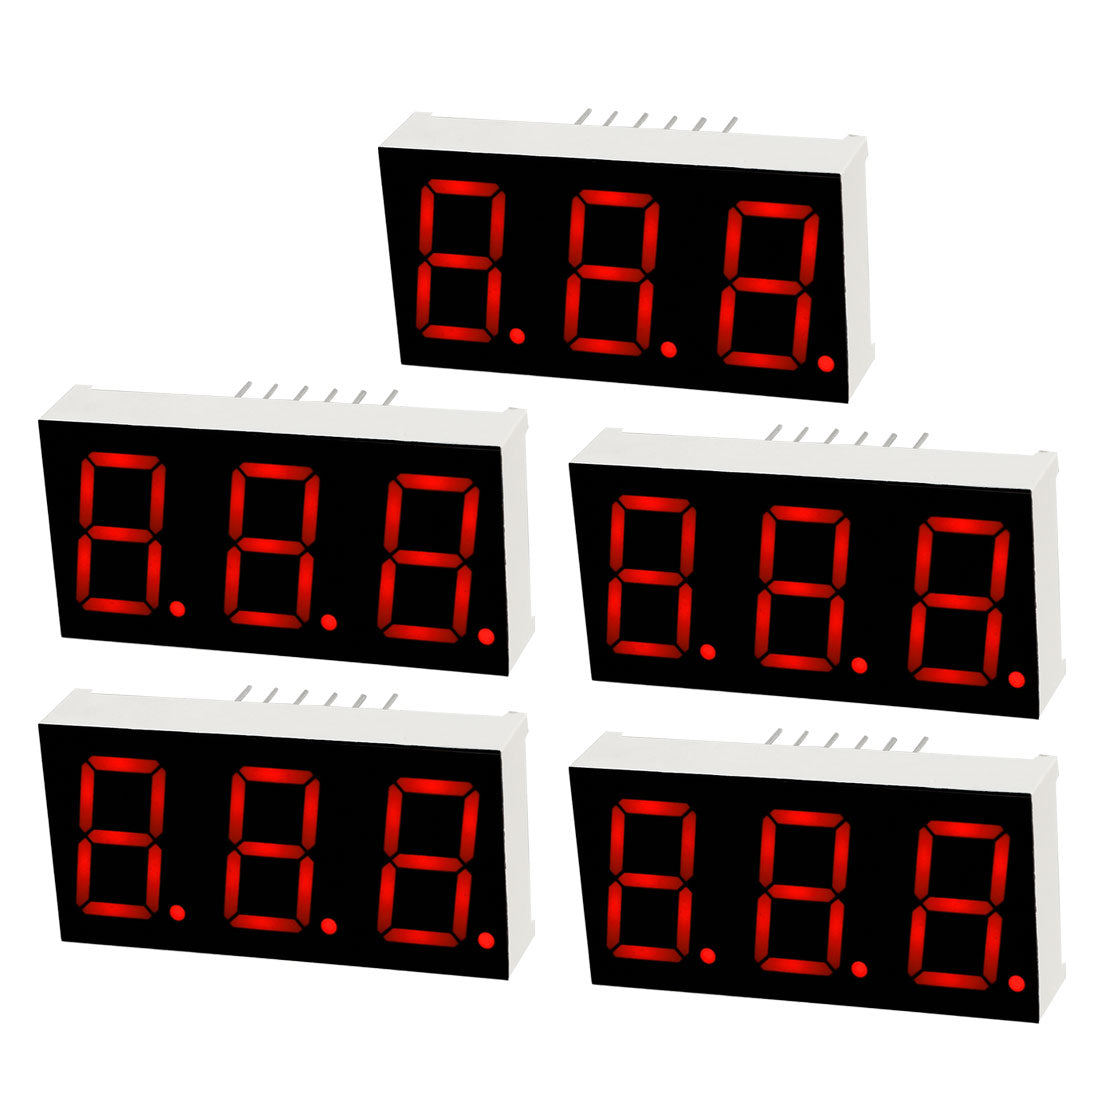 uxcell Uxcell Common Anode 12 Pin 3 Bit 7 Segment 1.48 x 0.75 x 0.31 Inch 0.55" Red LED Display Digital Tube 5pcs